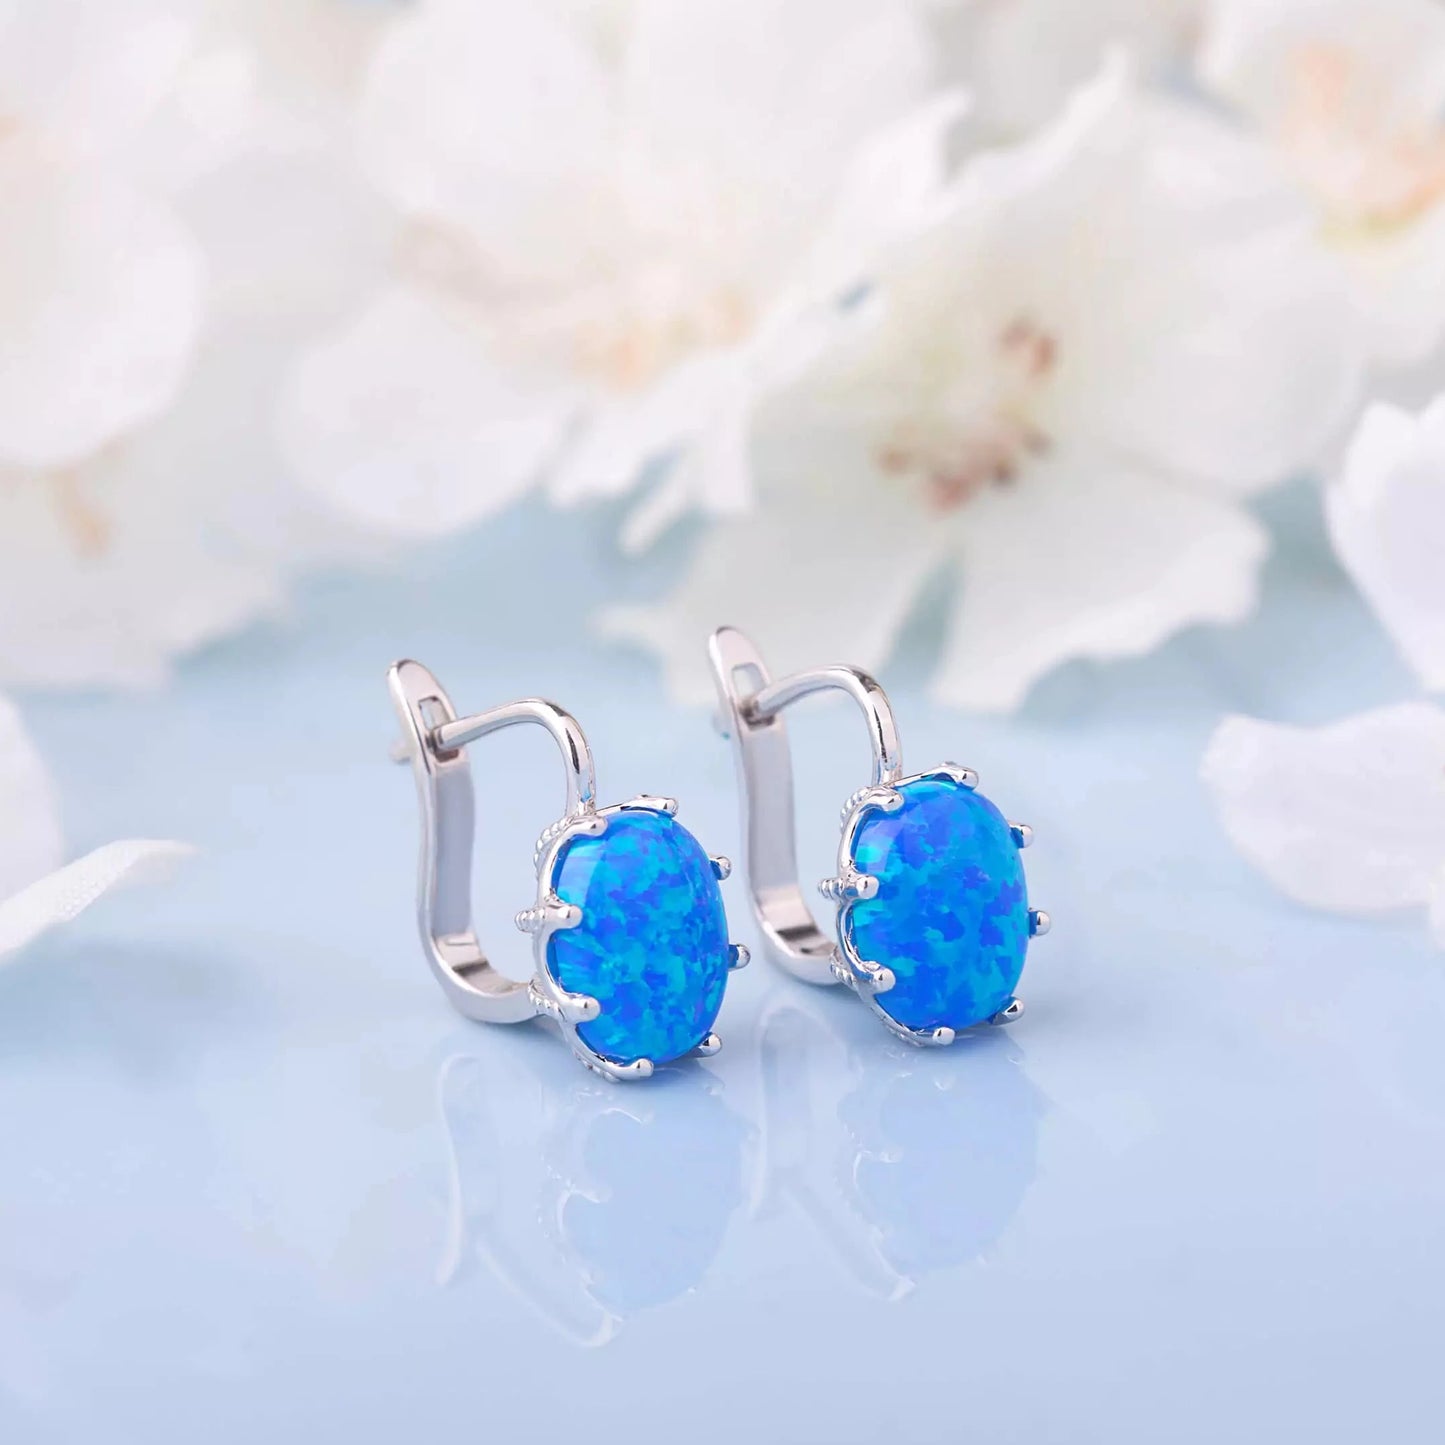 Blue Opal Vintage earrings made of white gold